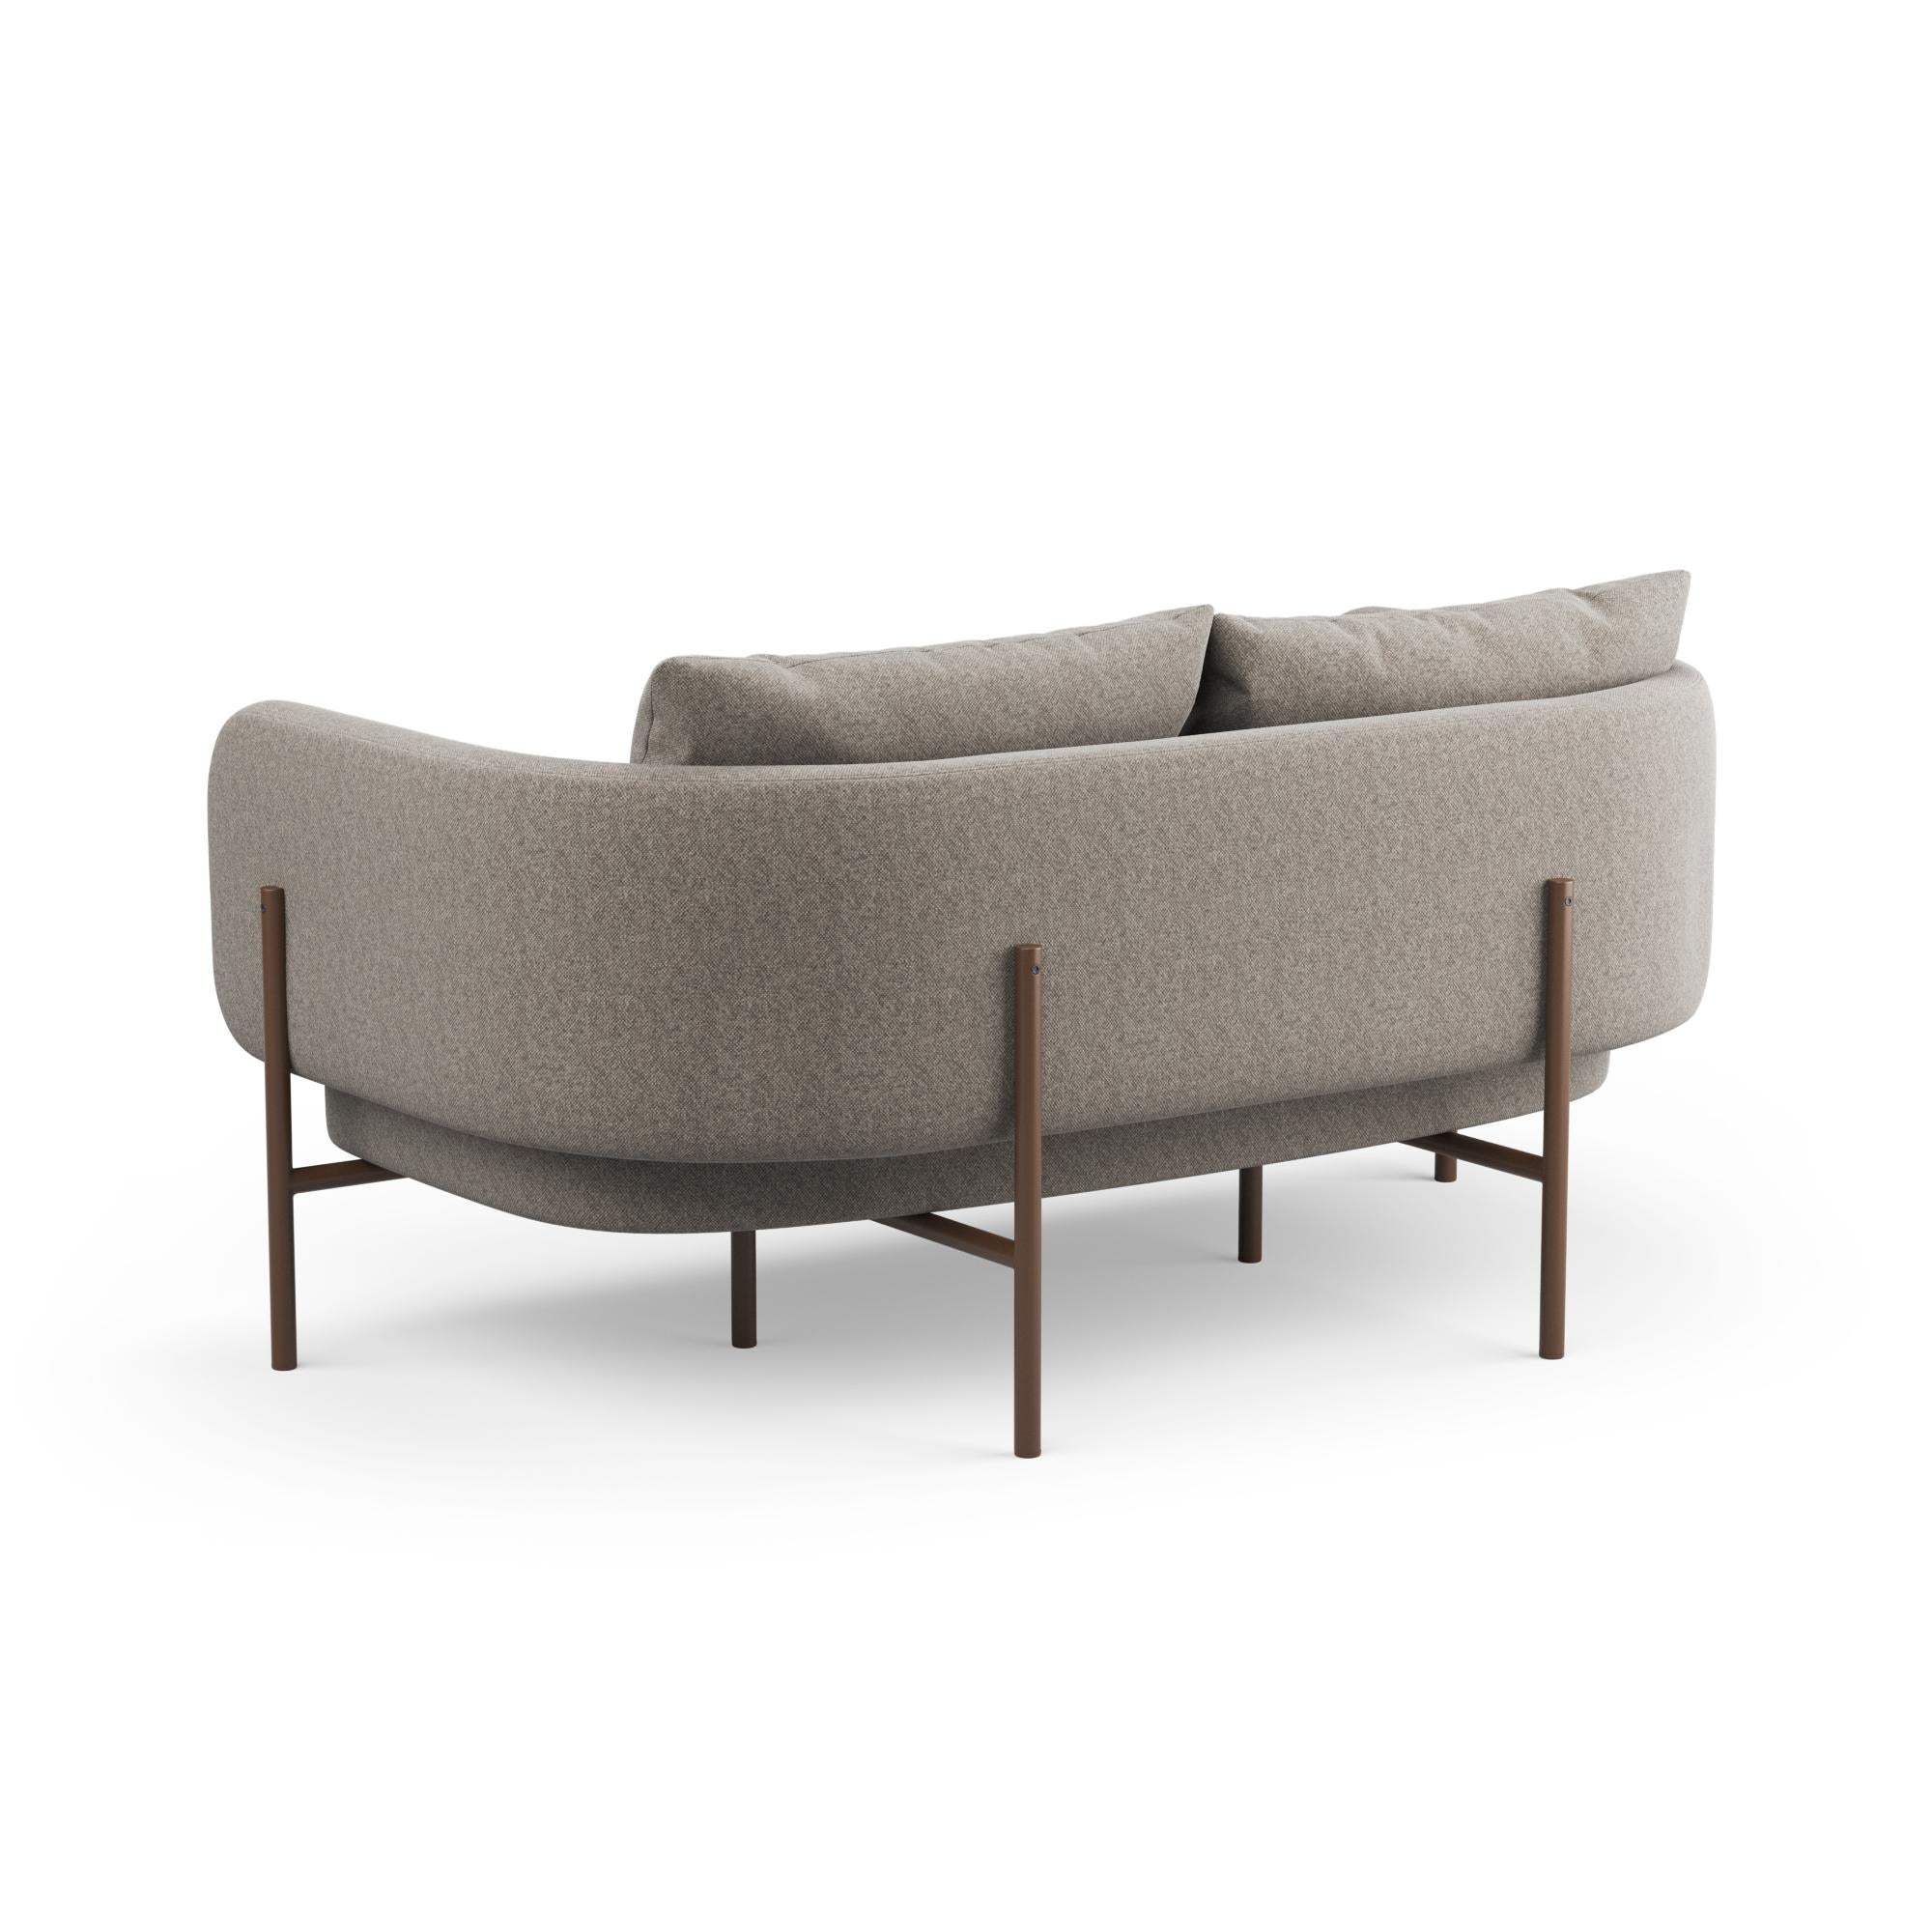 European Hayche Abrazo 2 Seater Sofa - Brown, UK, Made to Order For Sale